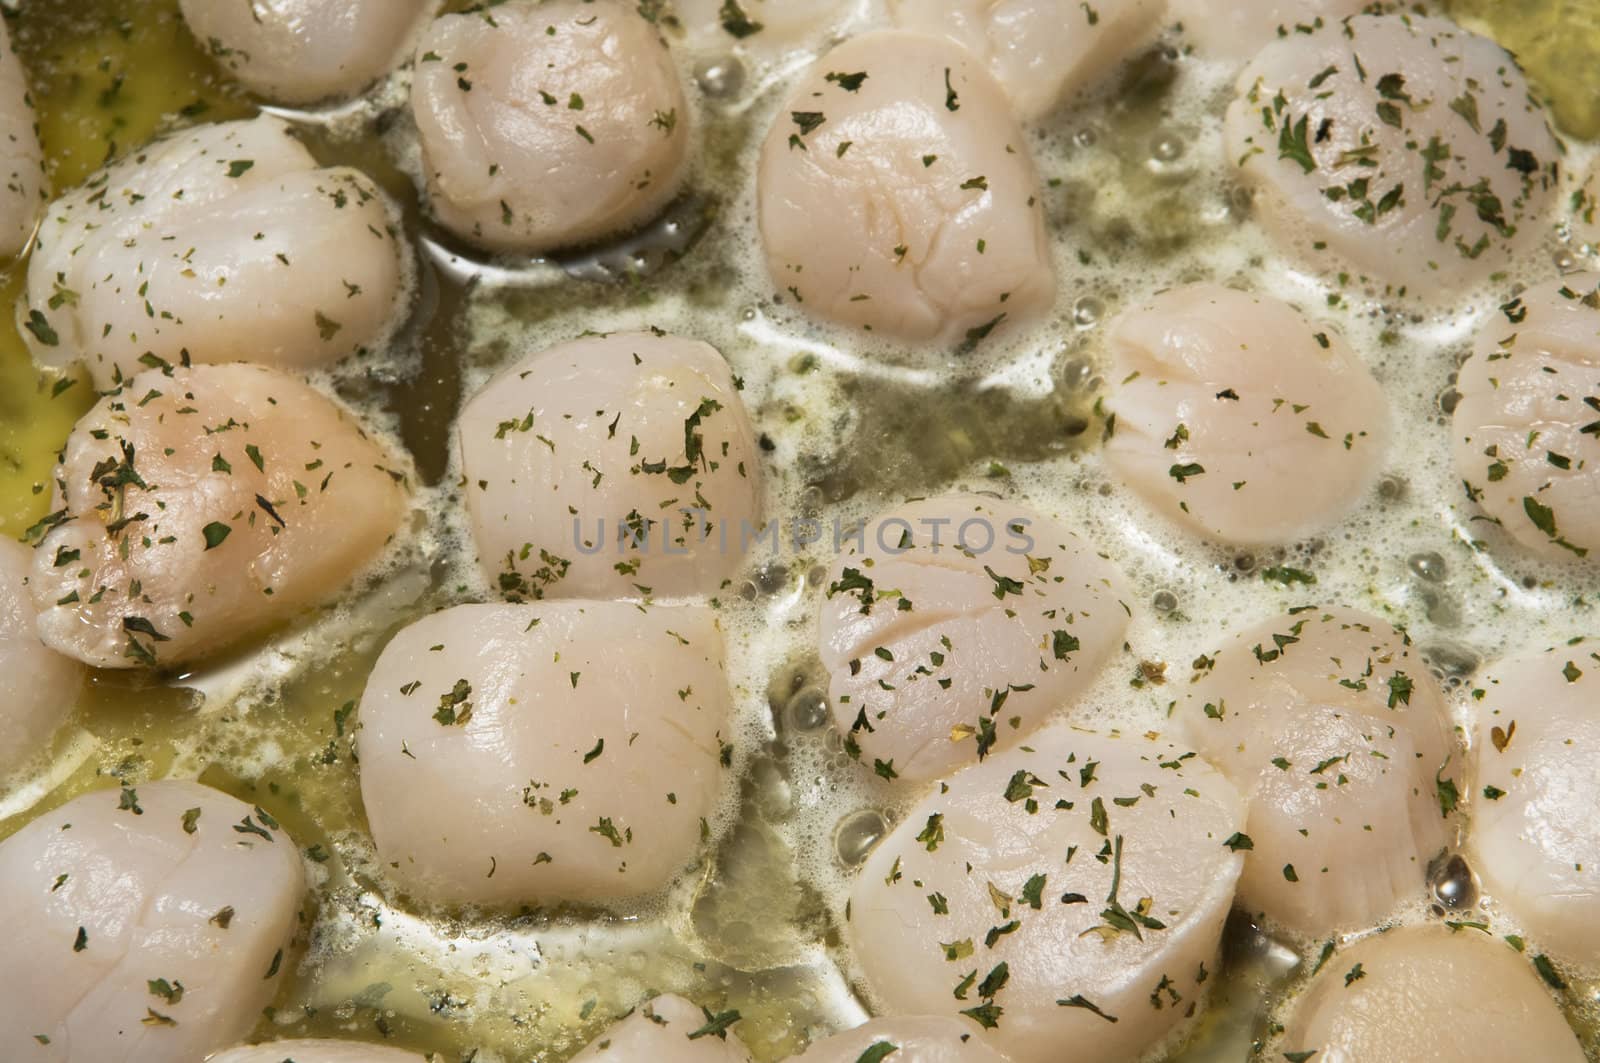 Selective focus on the foreground scallops cooking in butter